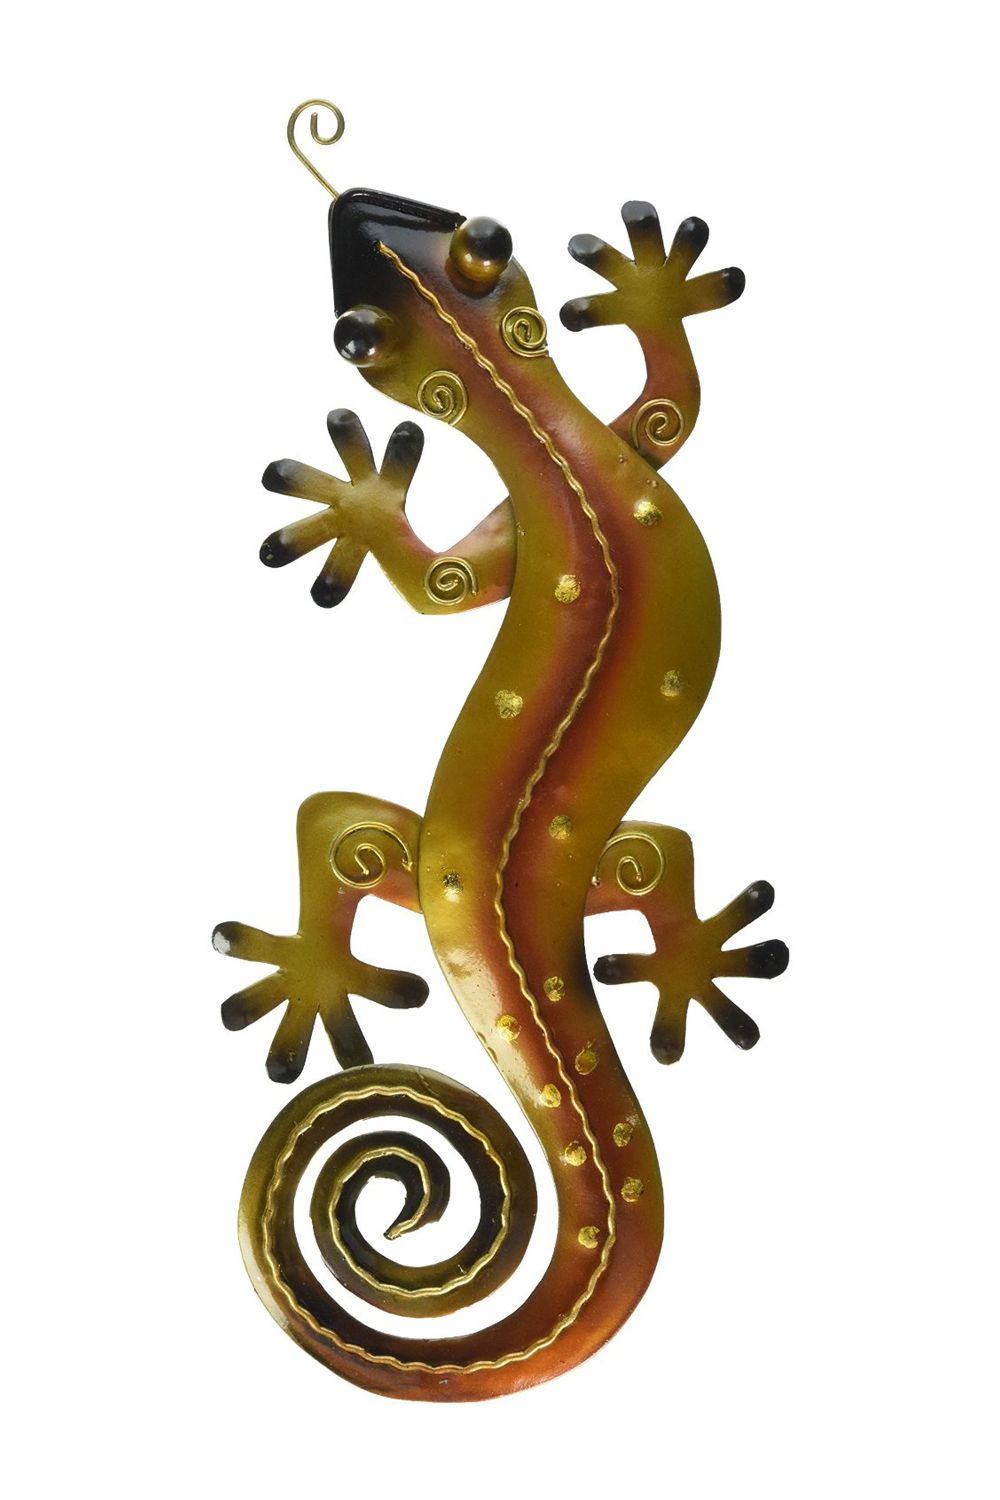 Handmade Unique Decorative Wall Mounting Iron Orange Gecko Wall Decor –  Small Intended For Gecko Wall Decor (View 8 of 30)